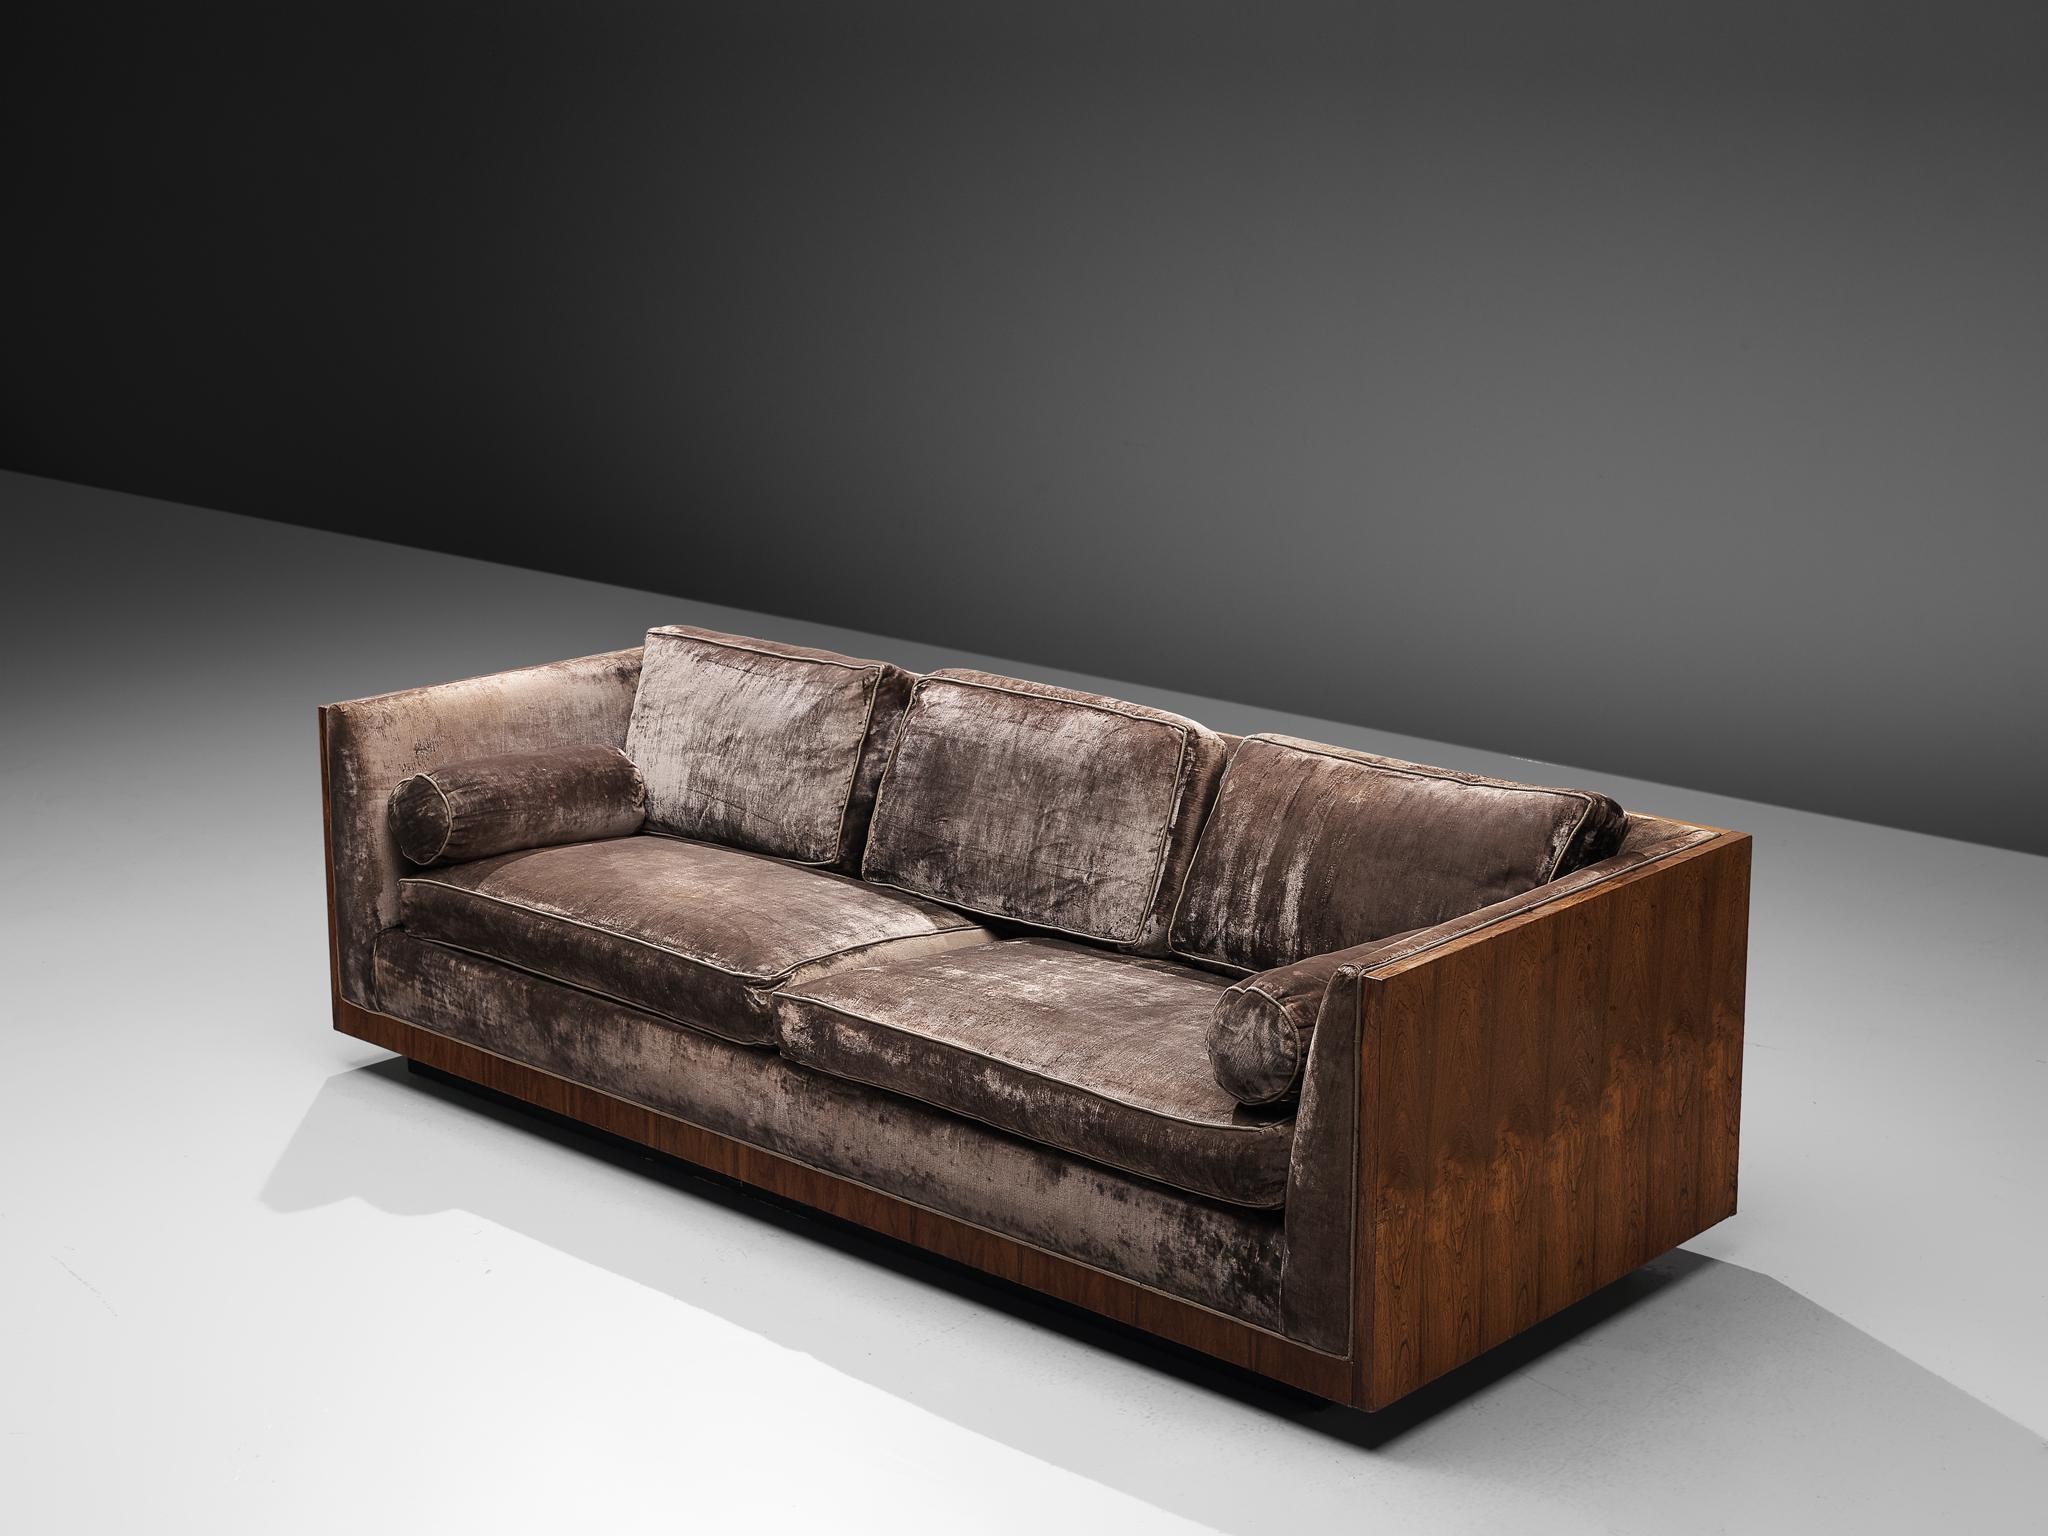 Milo Baughman, sofa, grey velvet, rosewood, United States, circa 1965

This three-seat 'basket' sofas is designed in circa 1965. The soft colored cushions fall perfectly in the rosewood frame of this settee. The design of this sofa is very